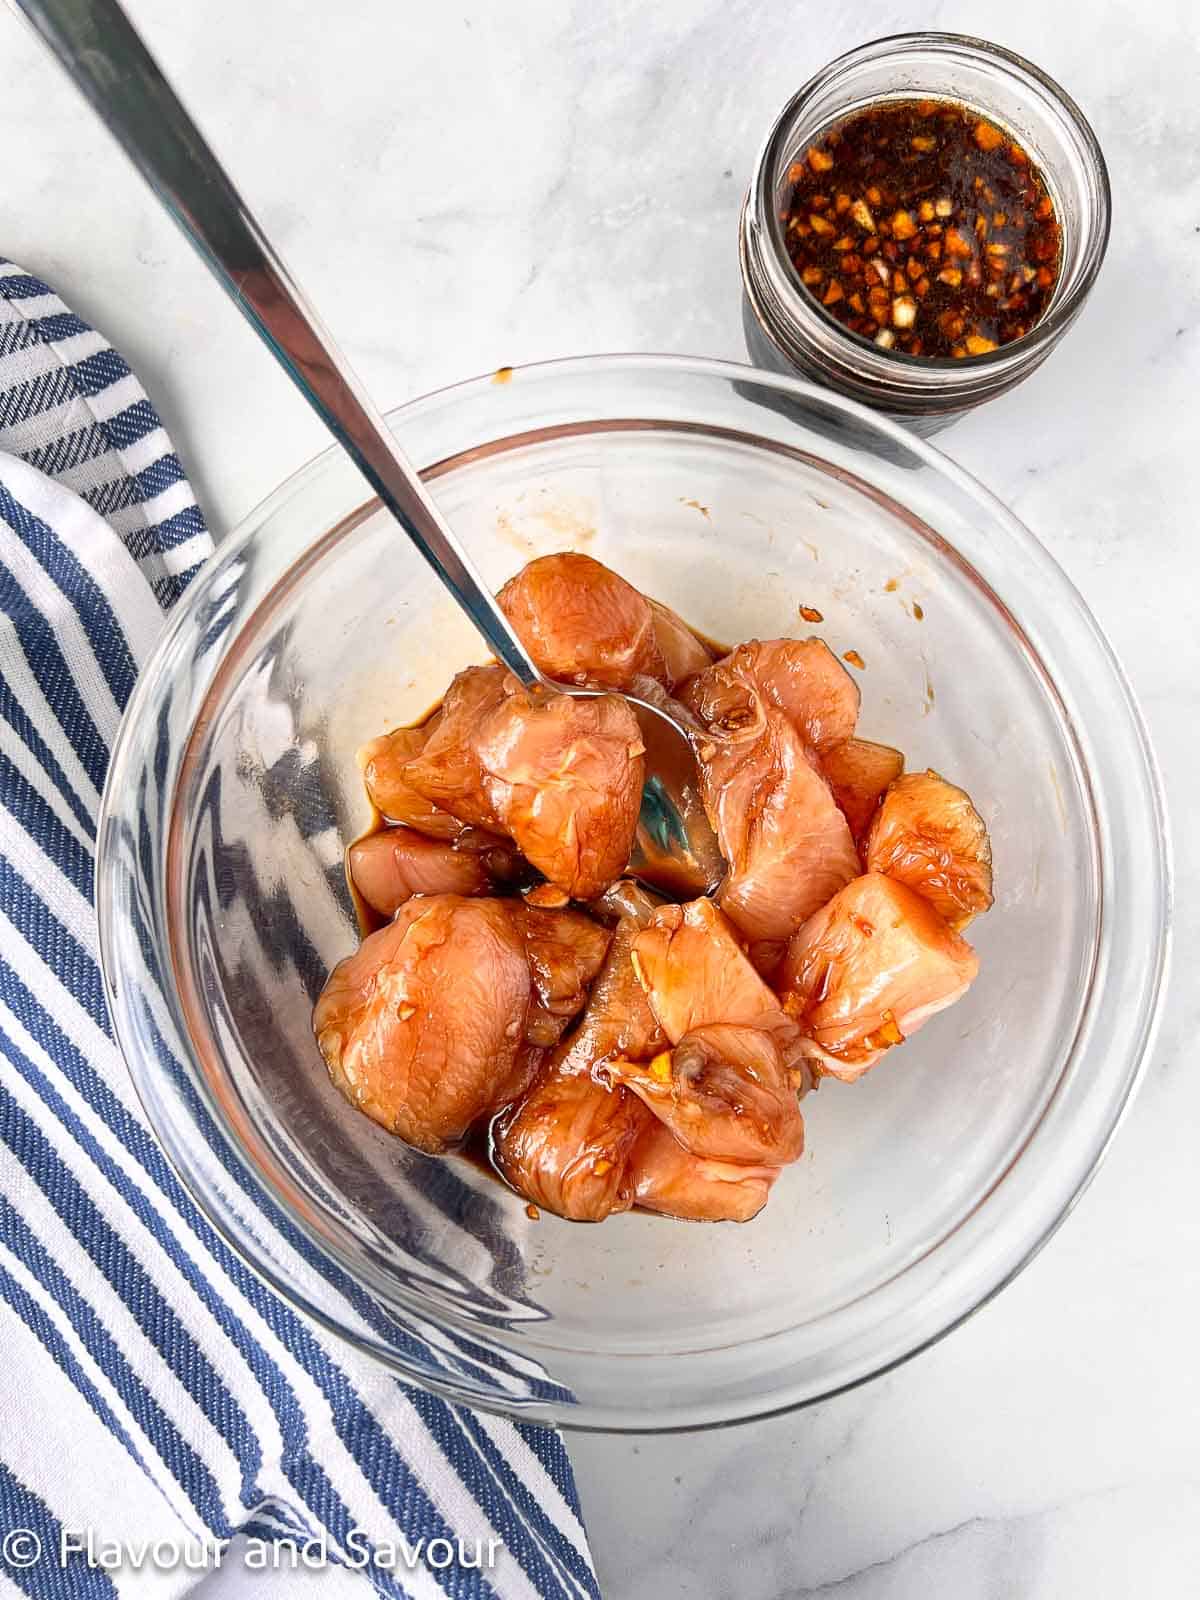 Chicken cubes with teriyaki marinade in a glass bowl.